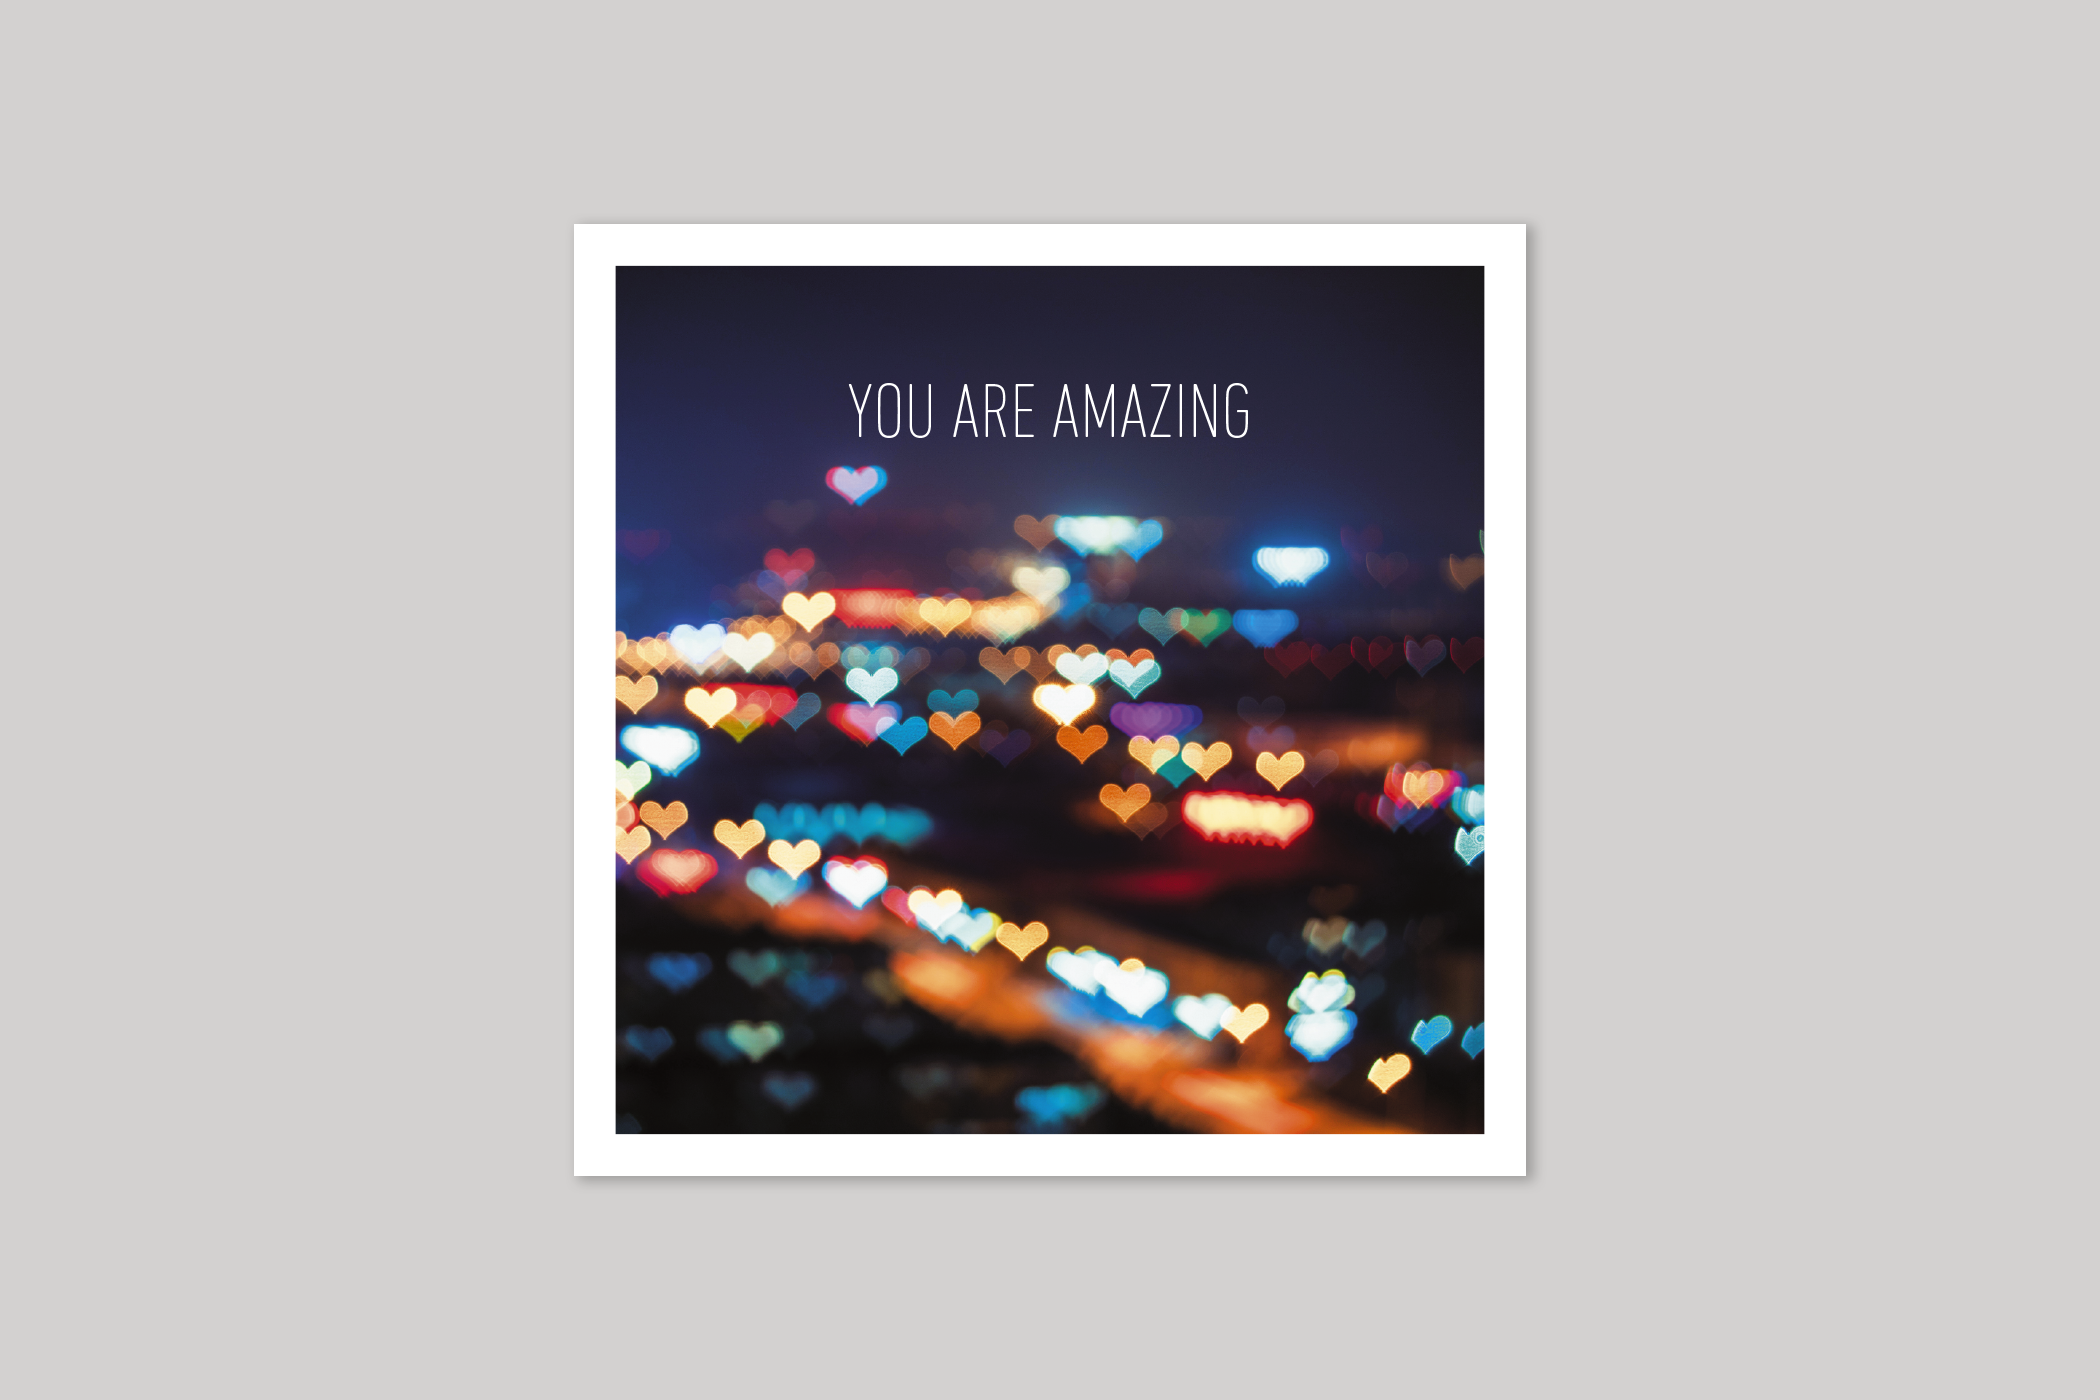 You Are Amazing from Beautiful Days range of contemporary photographic cards by Icon.